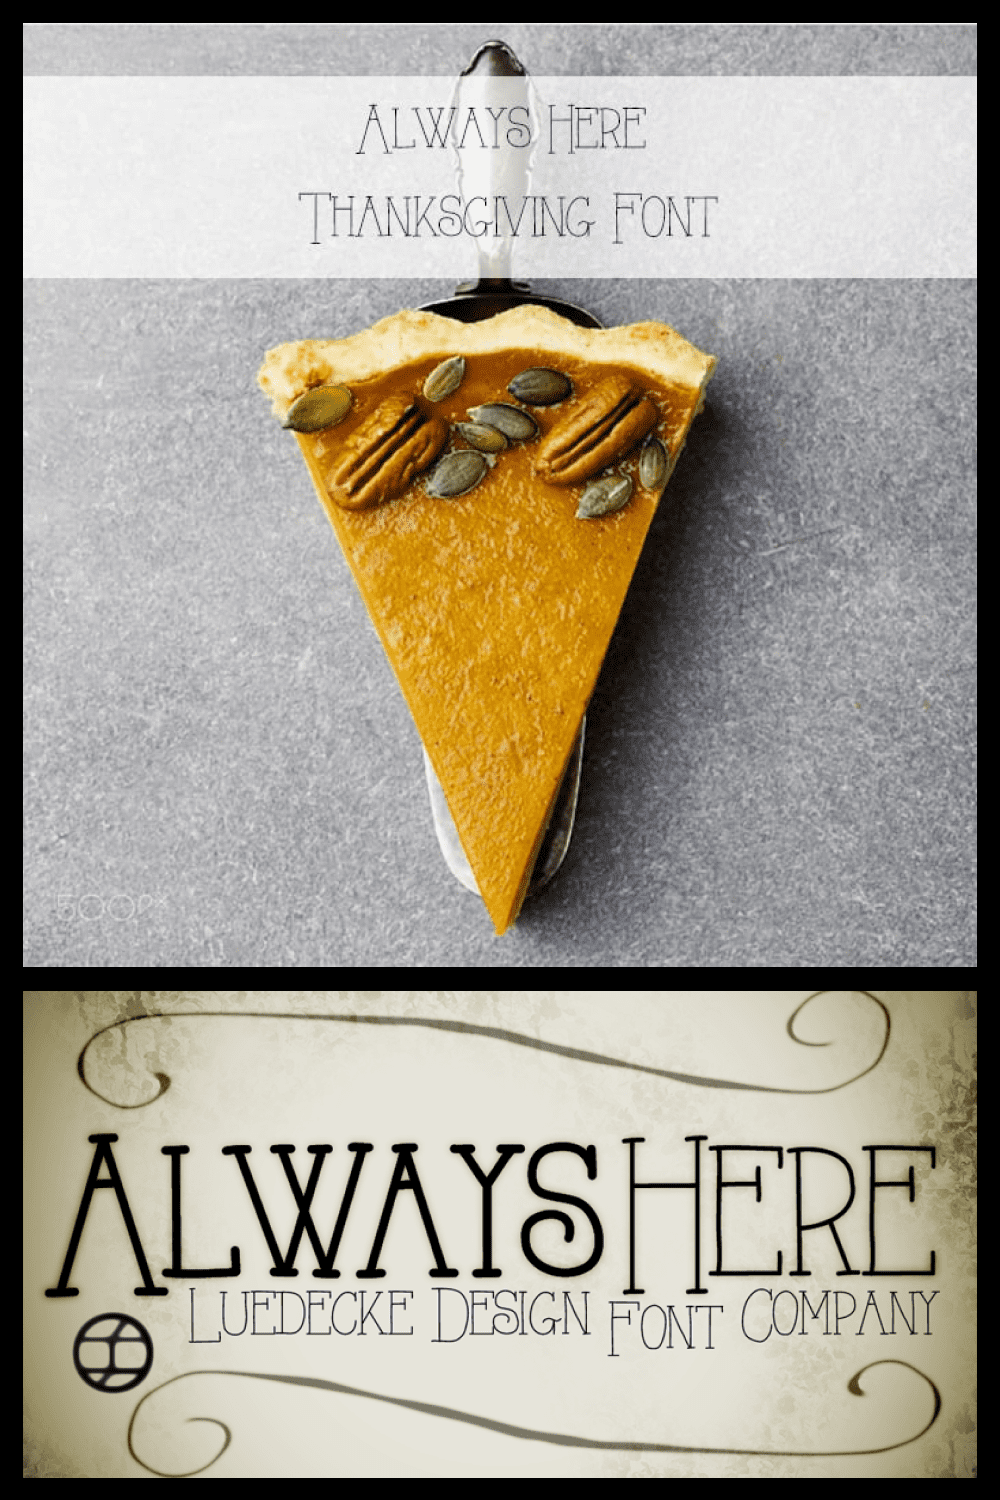 Always Here Thanksgiving font.